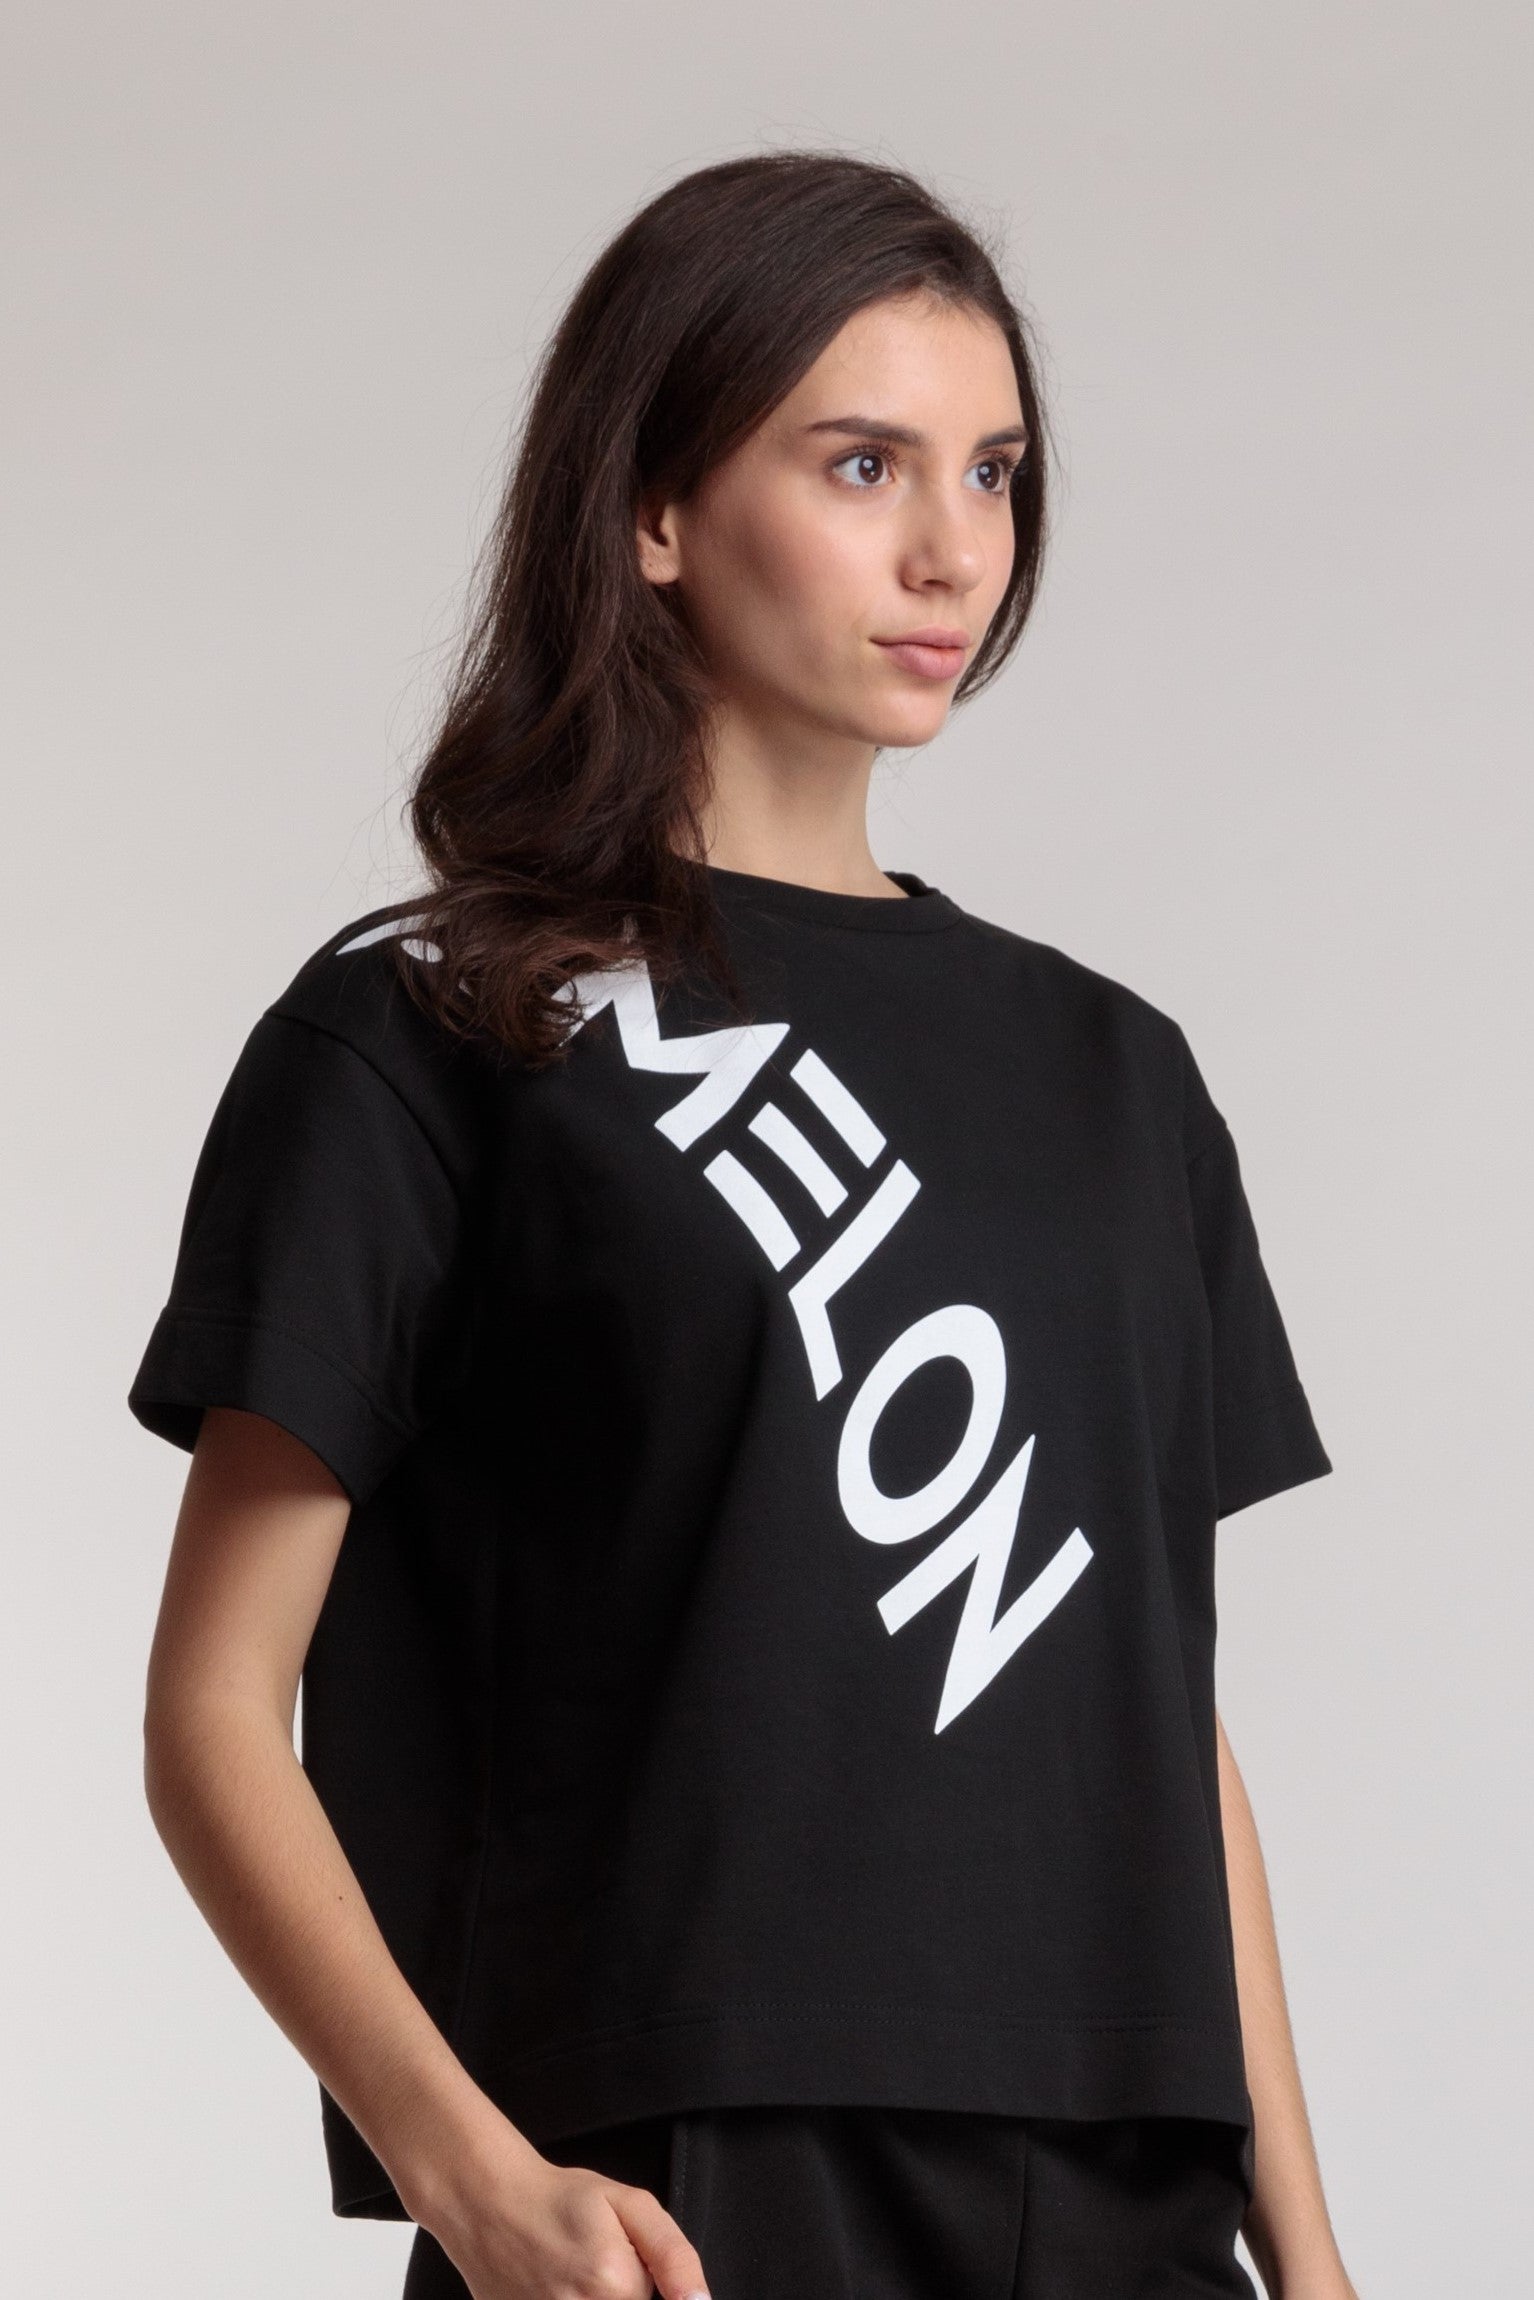 Women's straight black t-shirt with a large white lettering